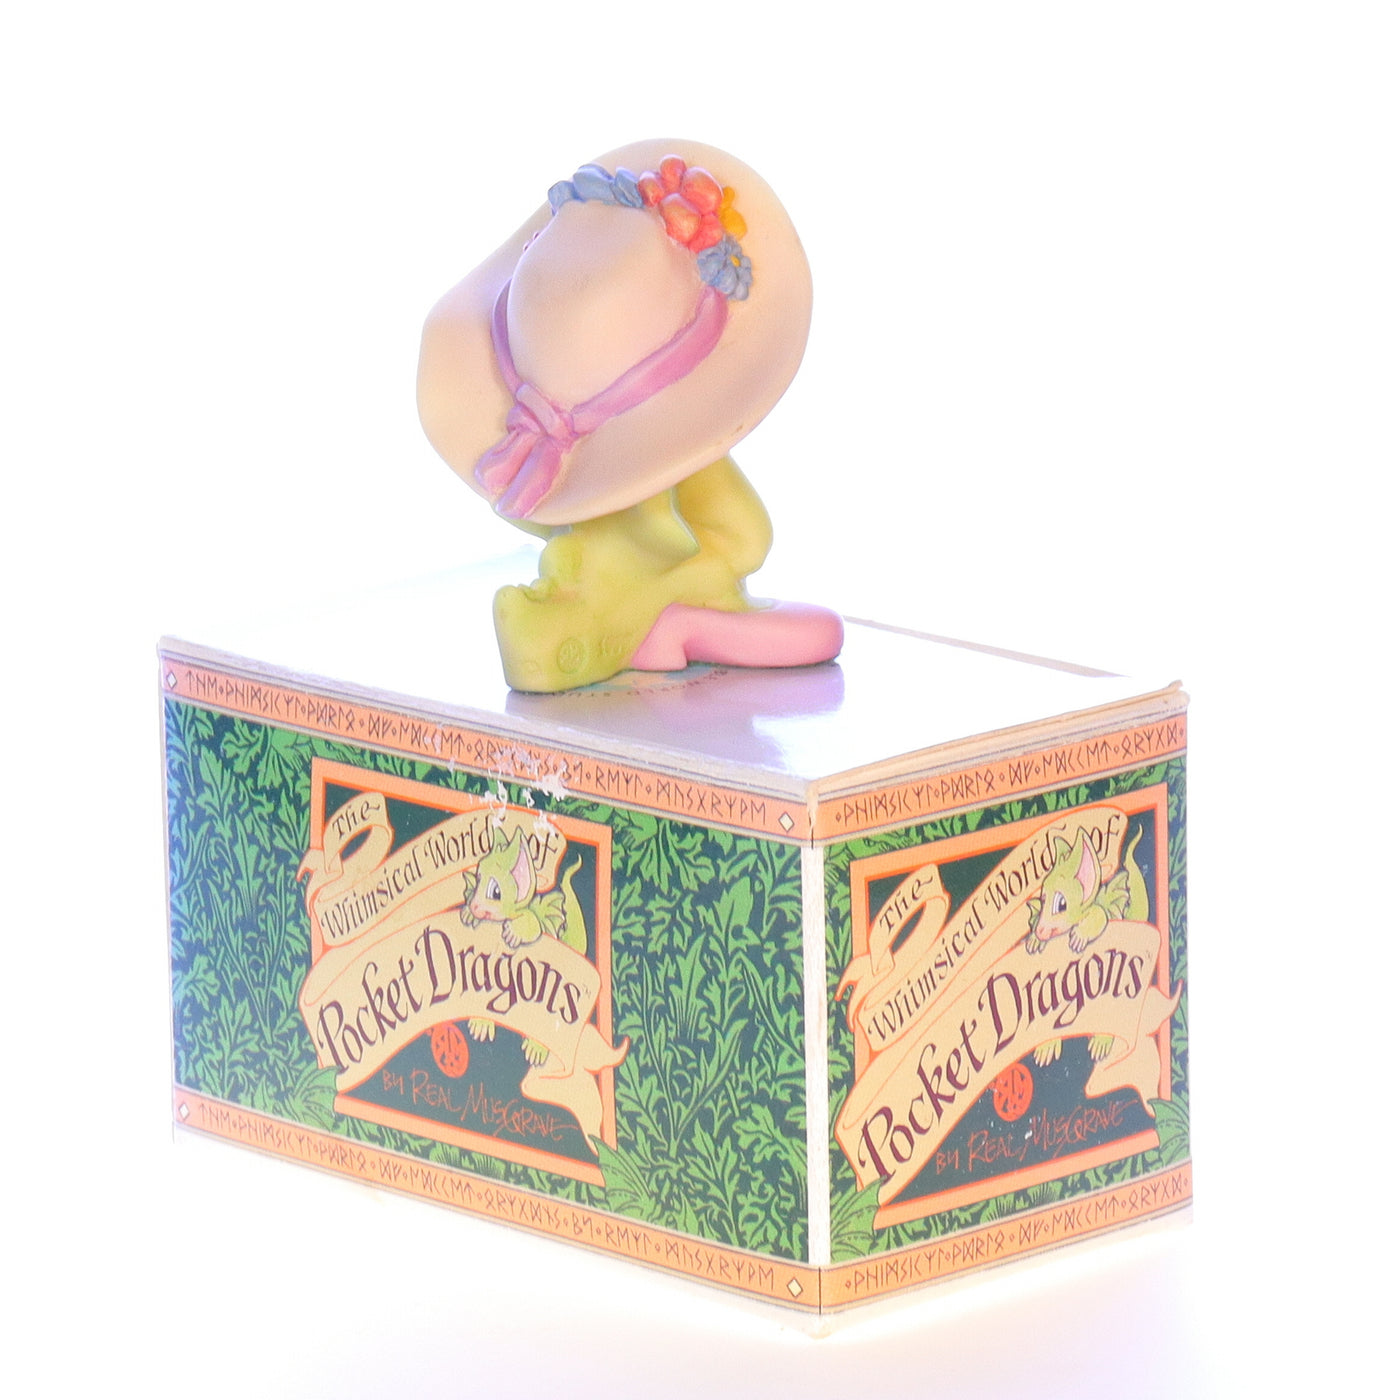 Whimsical_World_of_Pocket_Dragons_002914_Lady_Big_Hat_Fantasy_Figurine_1998_Box Back Right View